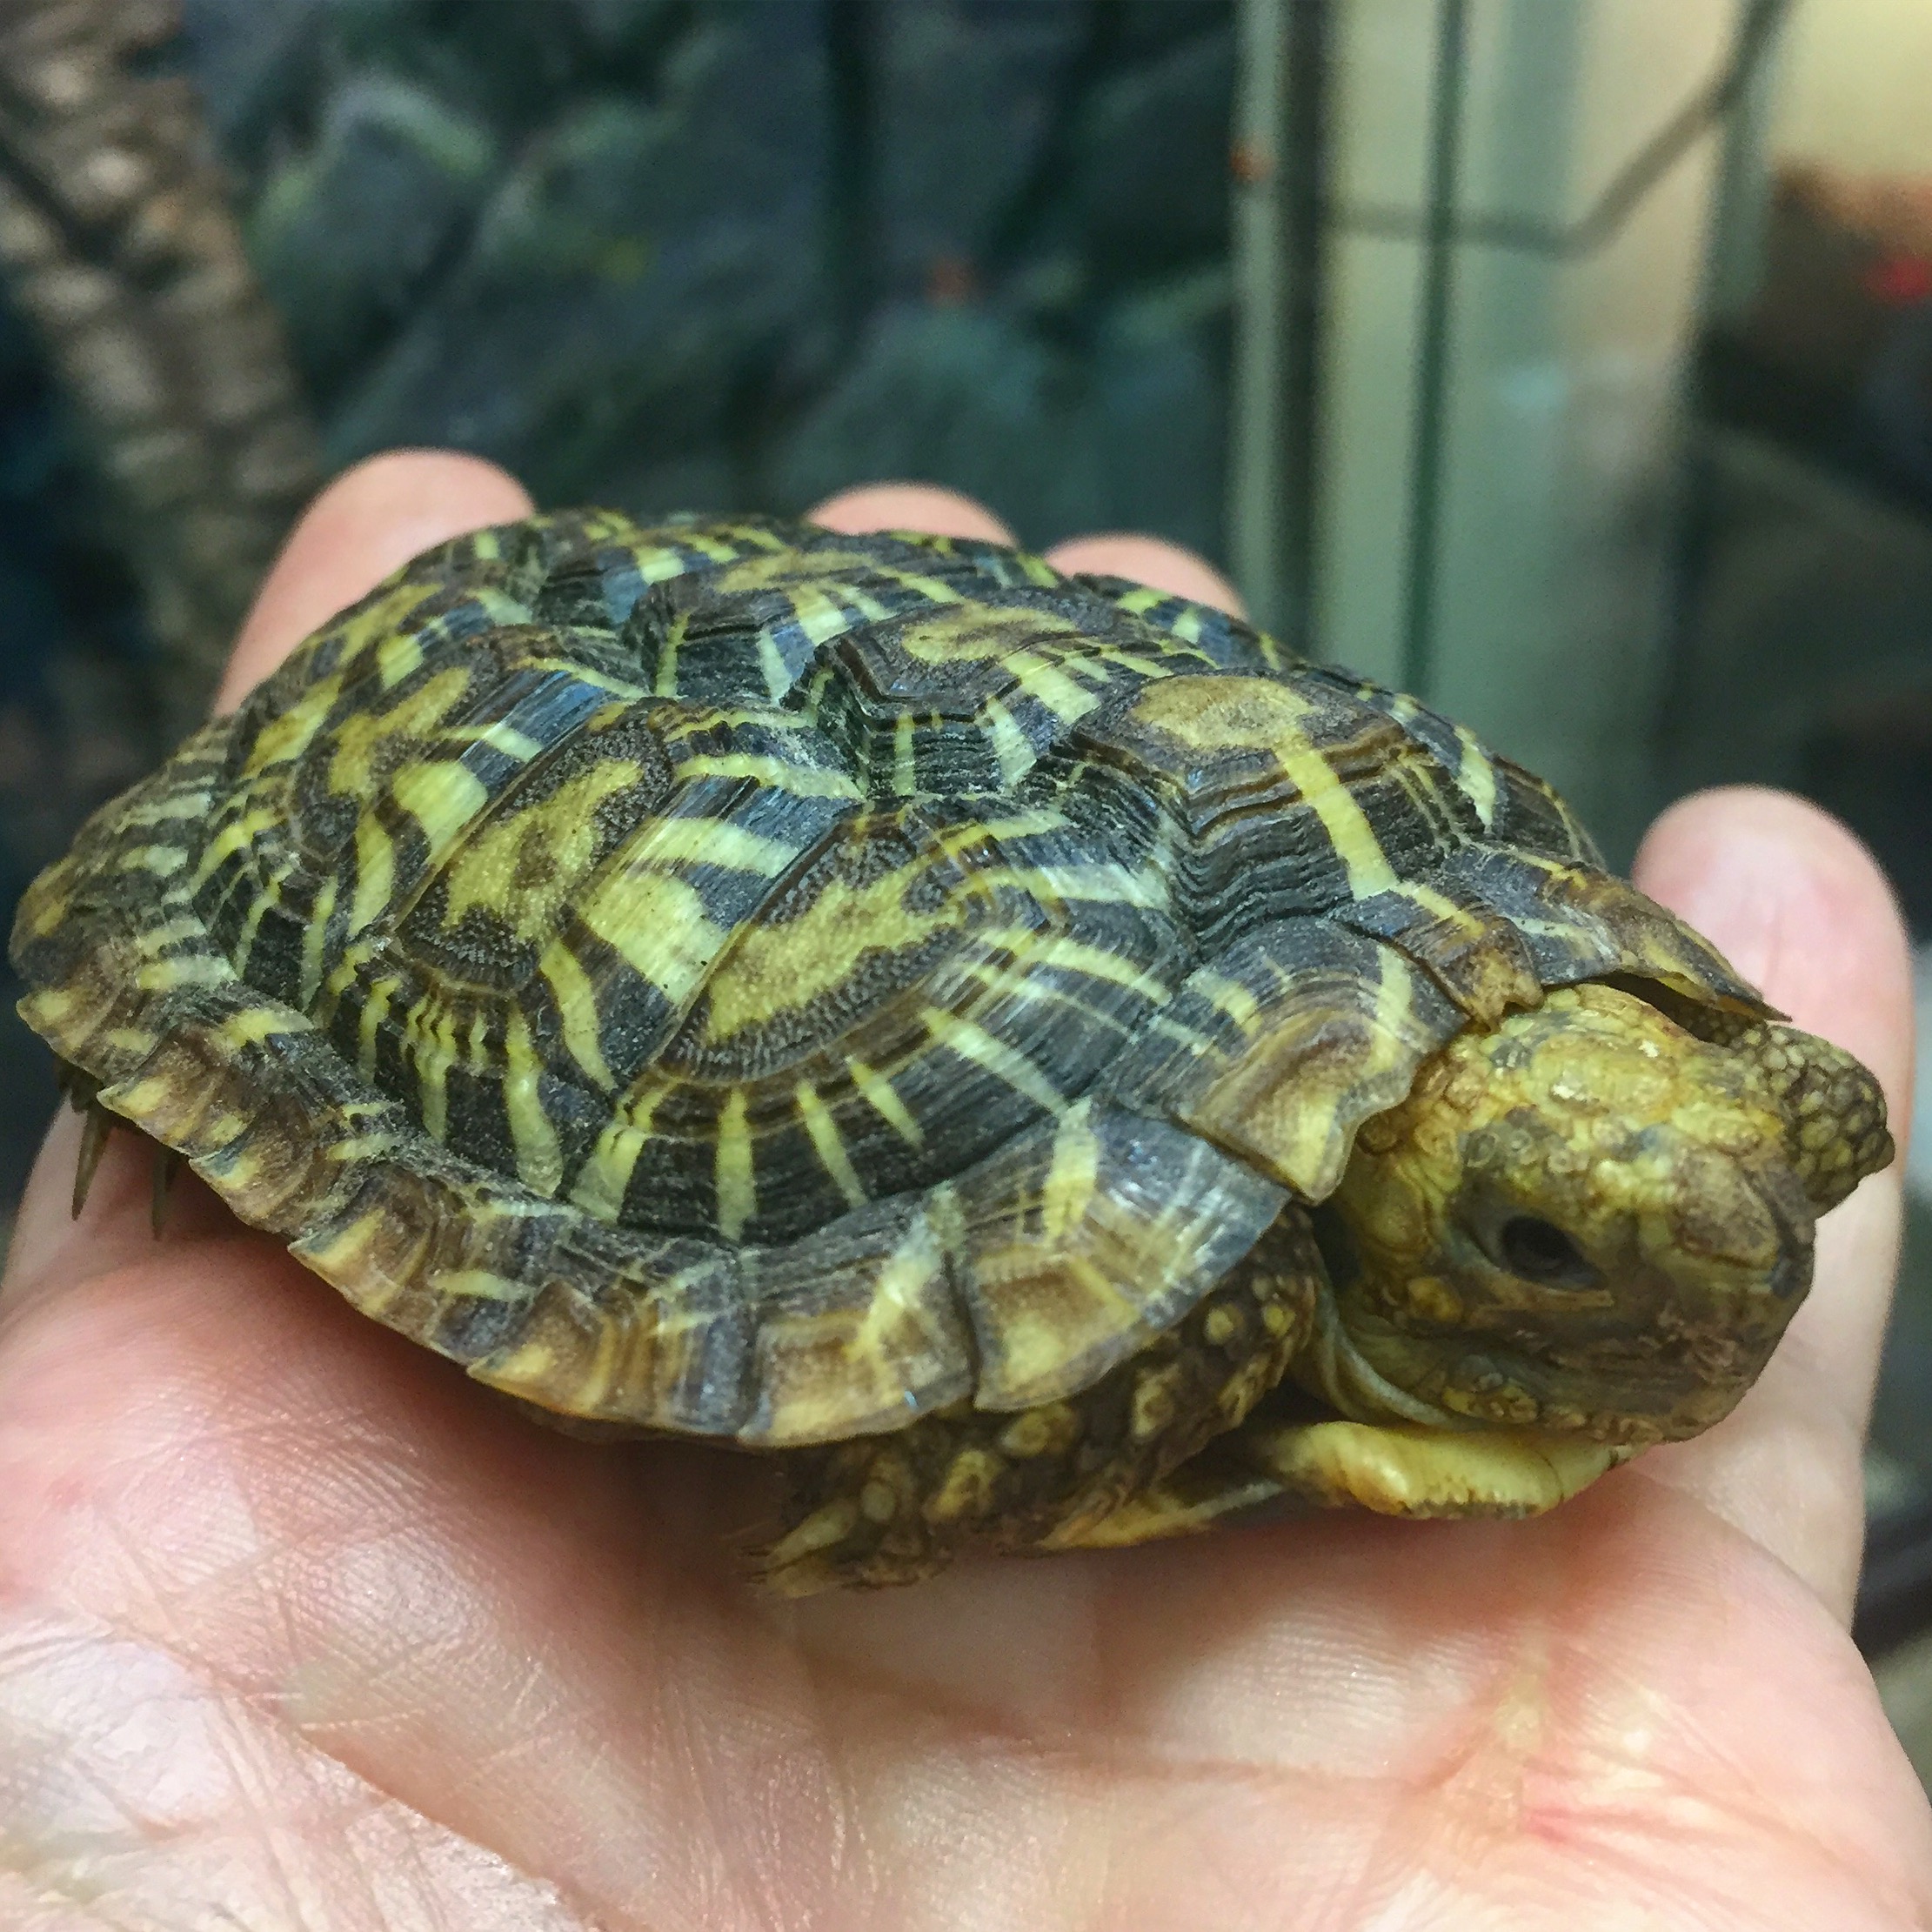 Pancake tortoise in the palm of a person's hand